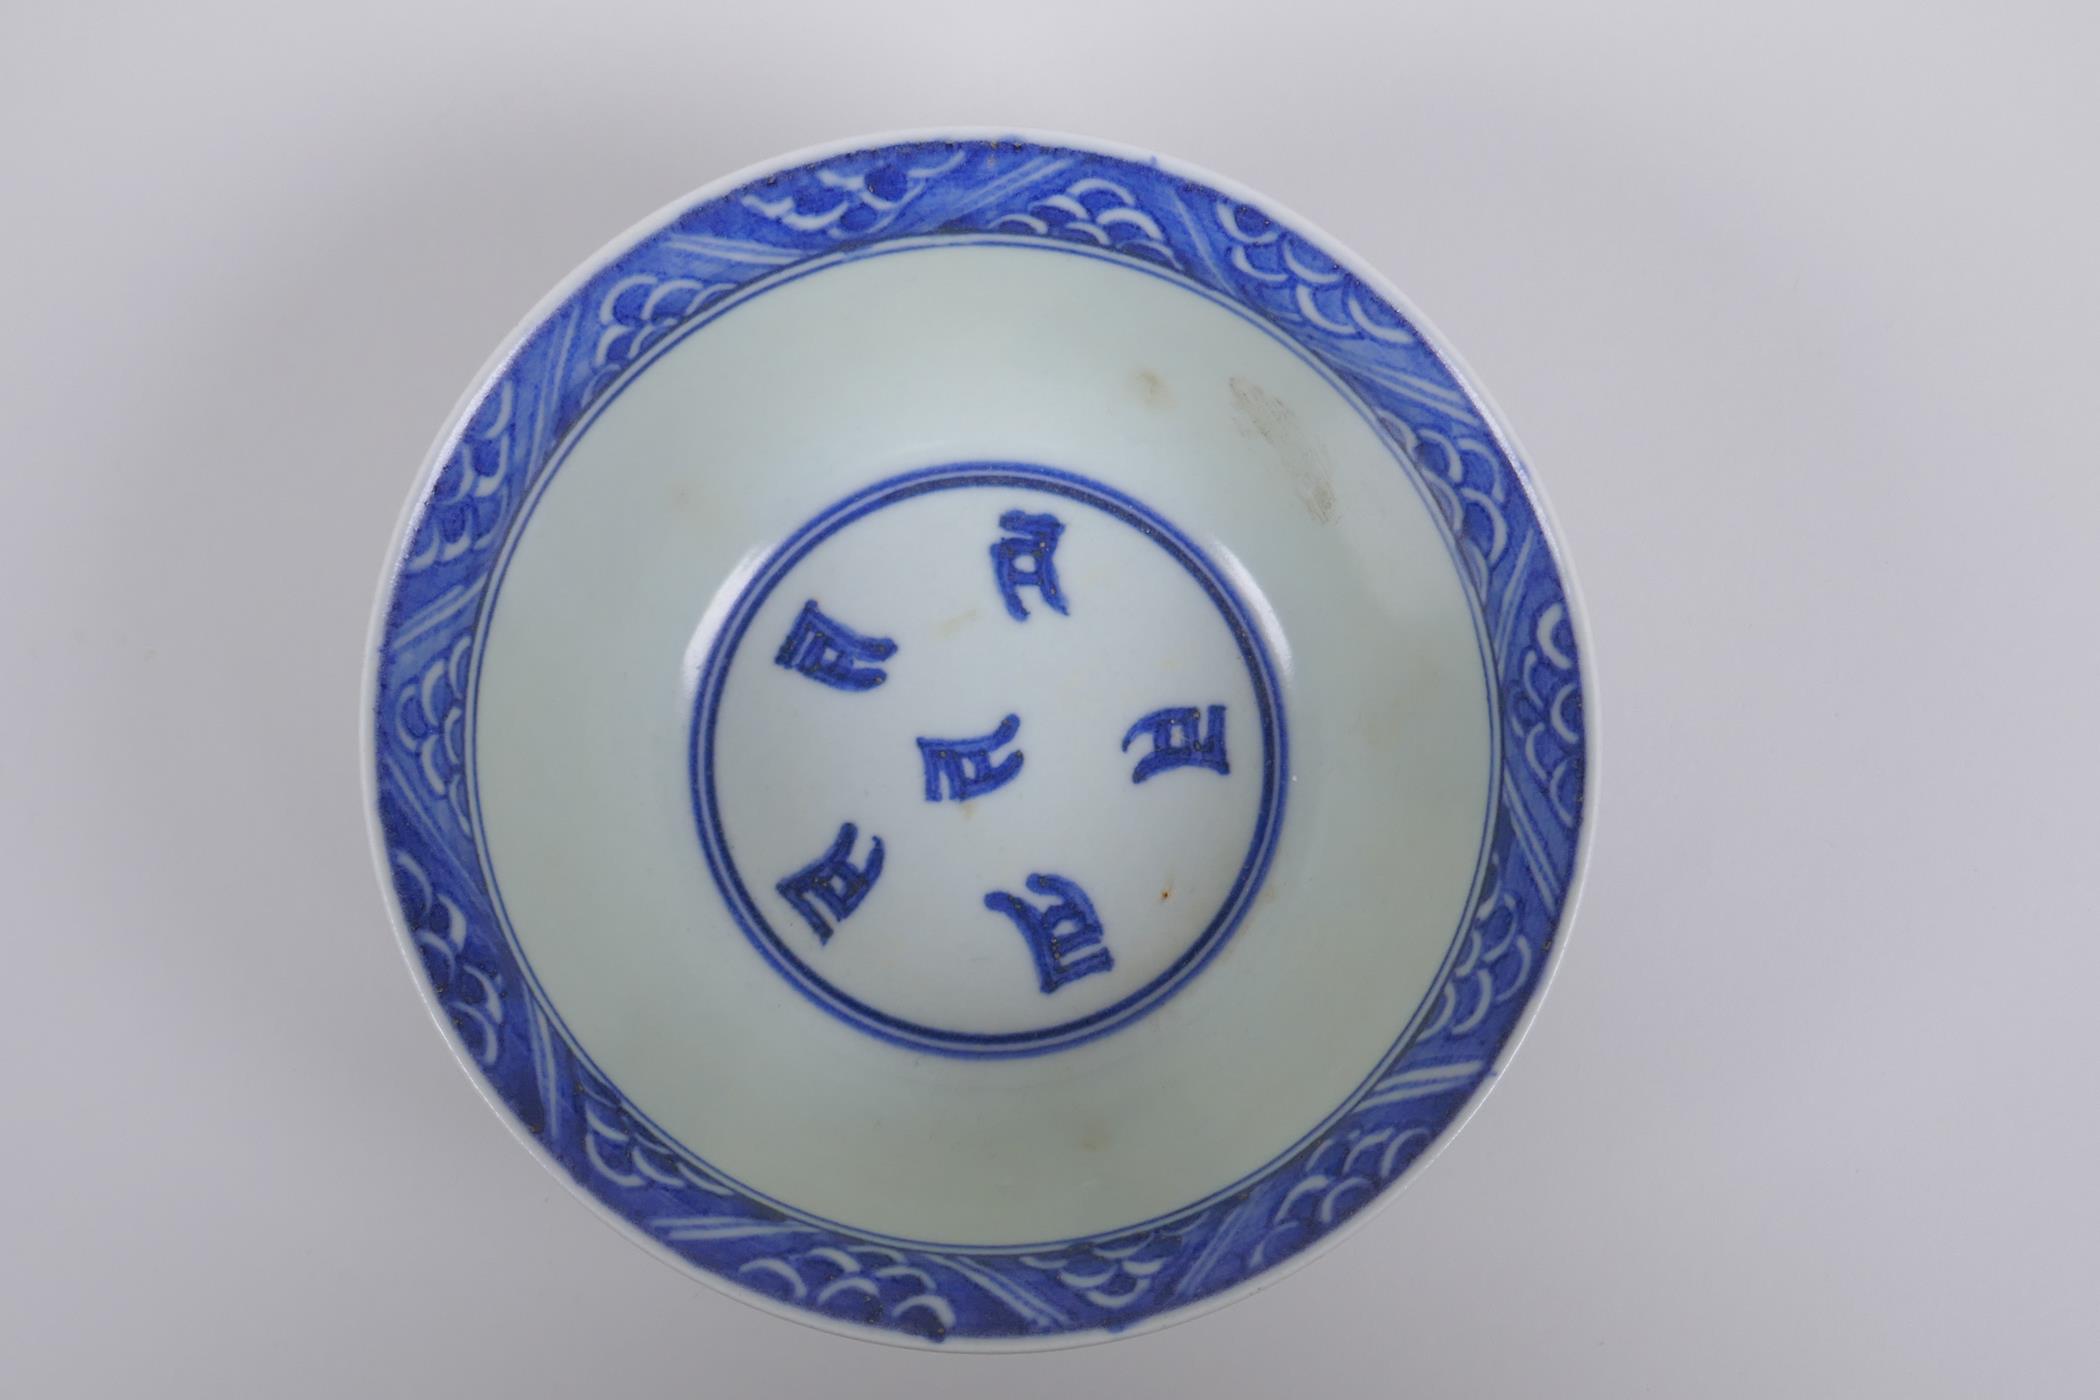 A Chinese blue and white porcelain rice bowl with script and lotus flower decoration, 13cm diameter - Image 2 of 4